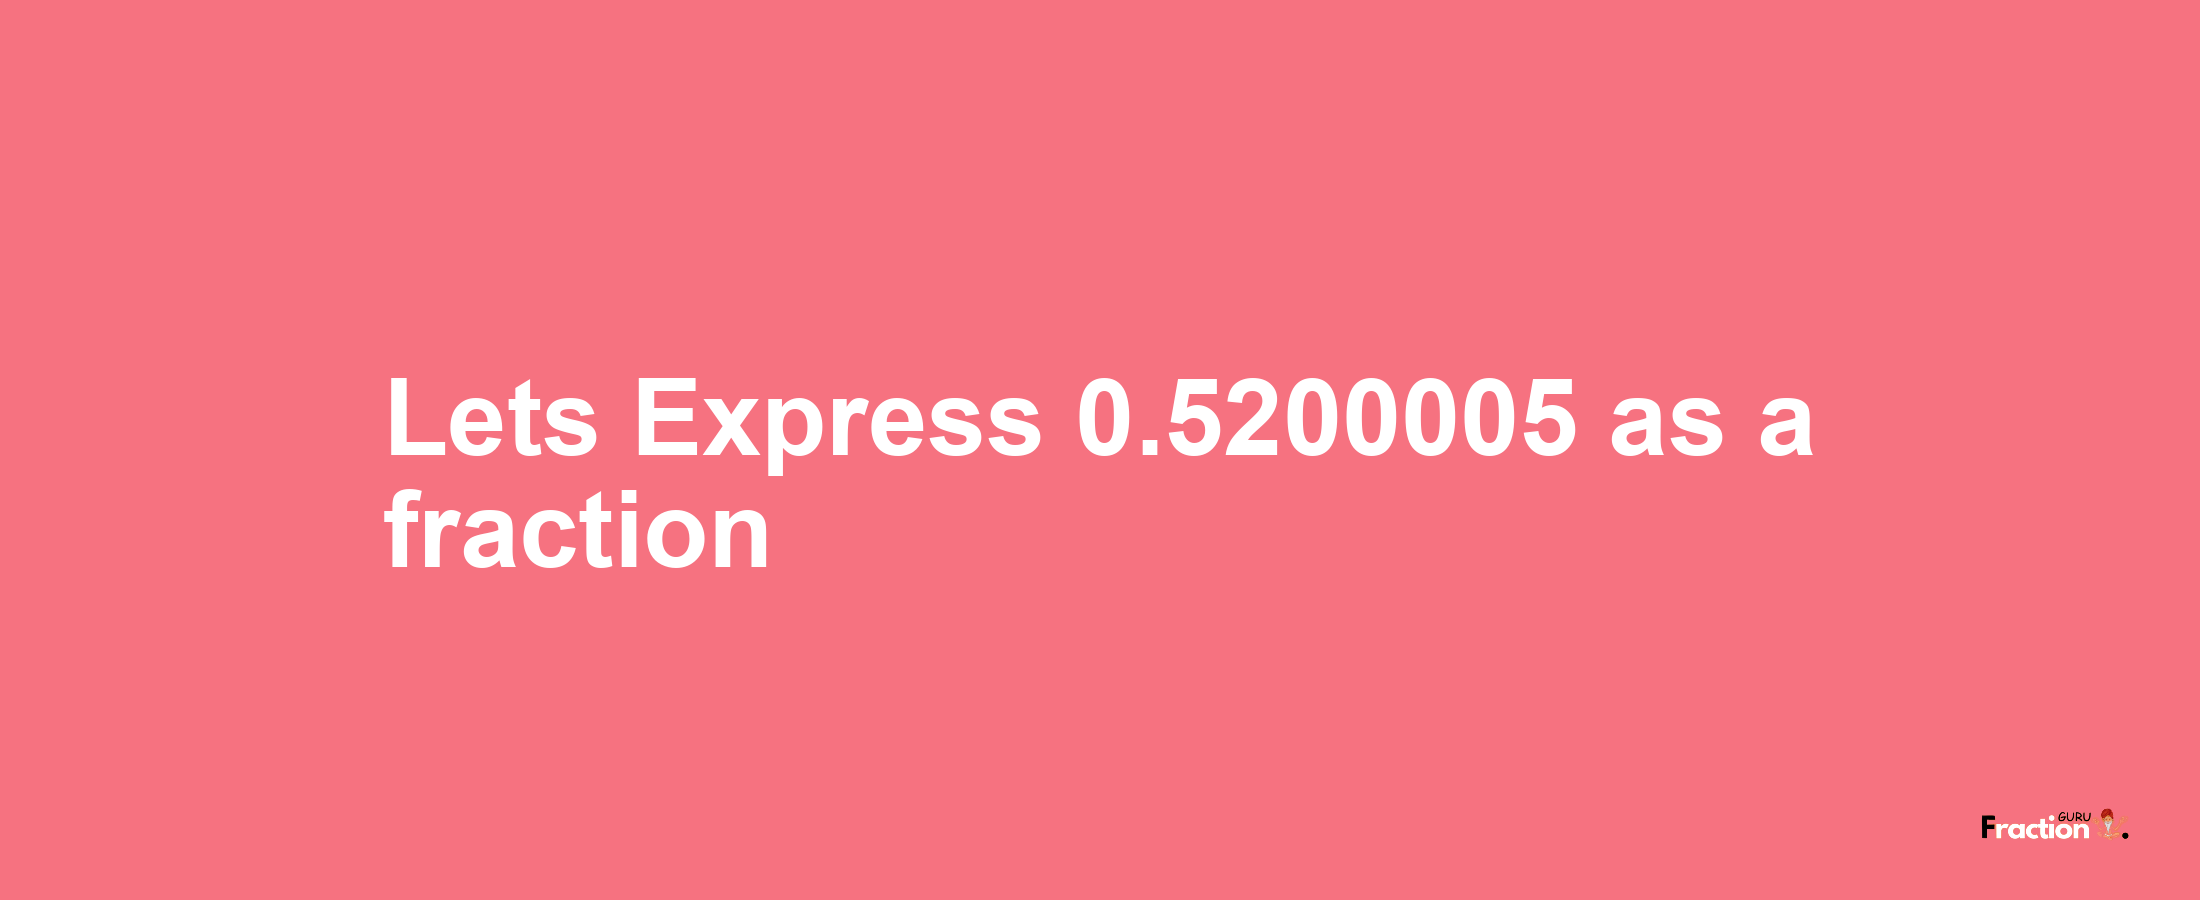 Lets Express 0.5200005 as afraction